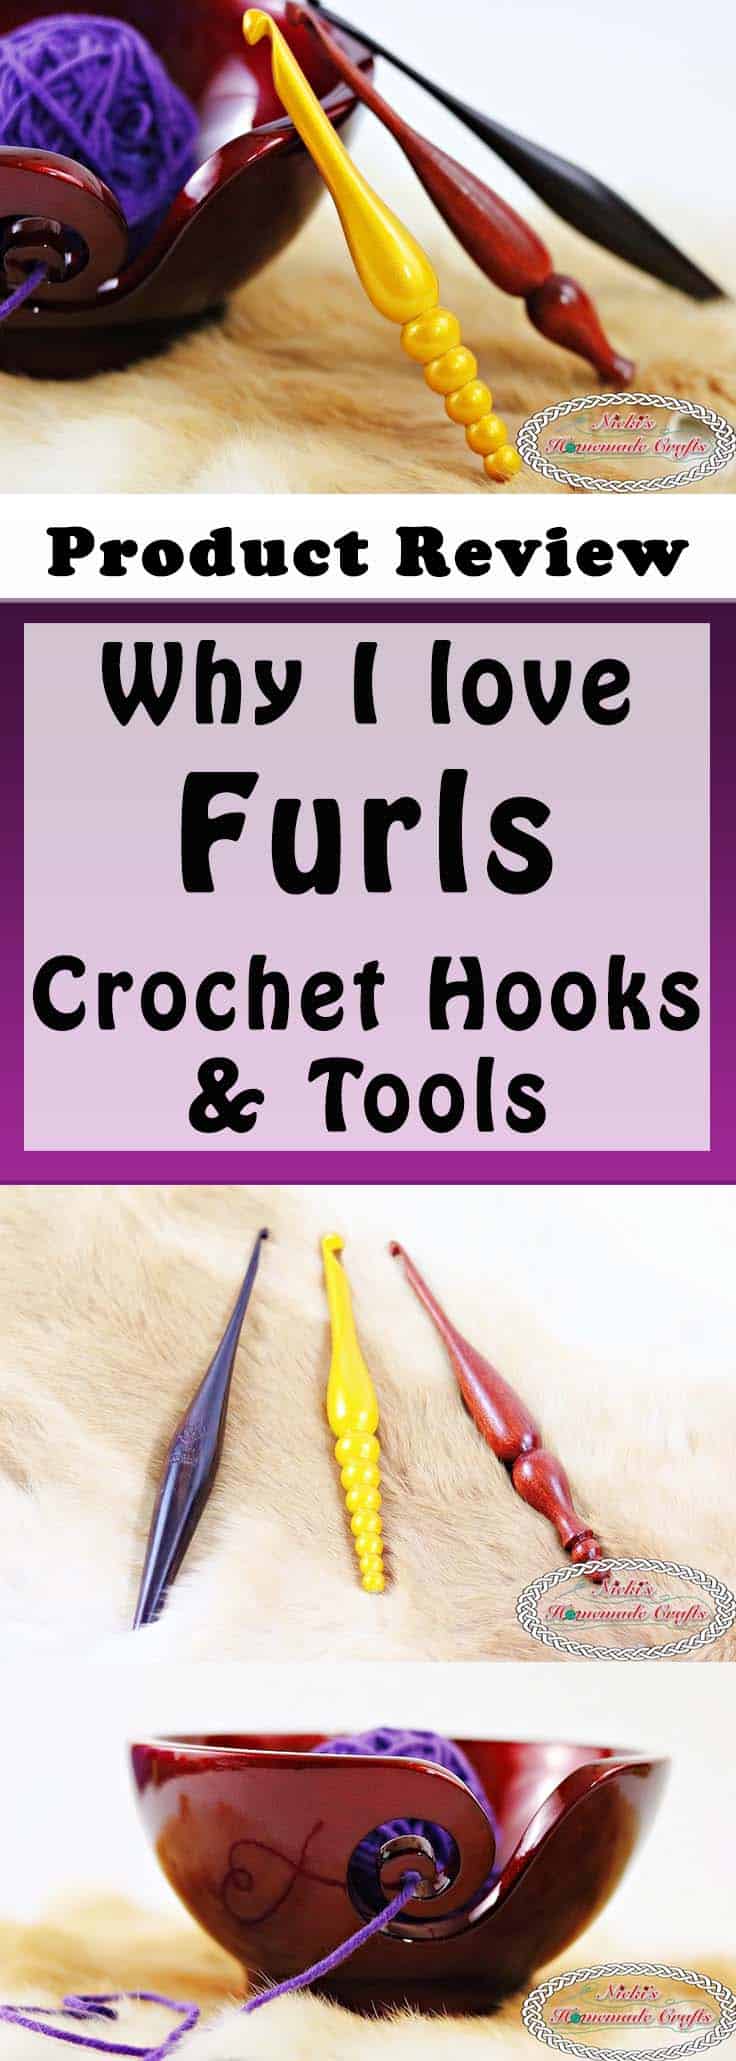 Furls Crochet Odyssey hook review - Comparing with other crochet hooks 